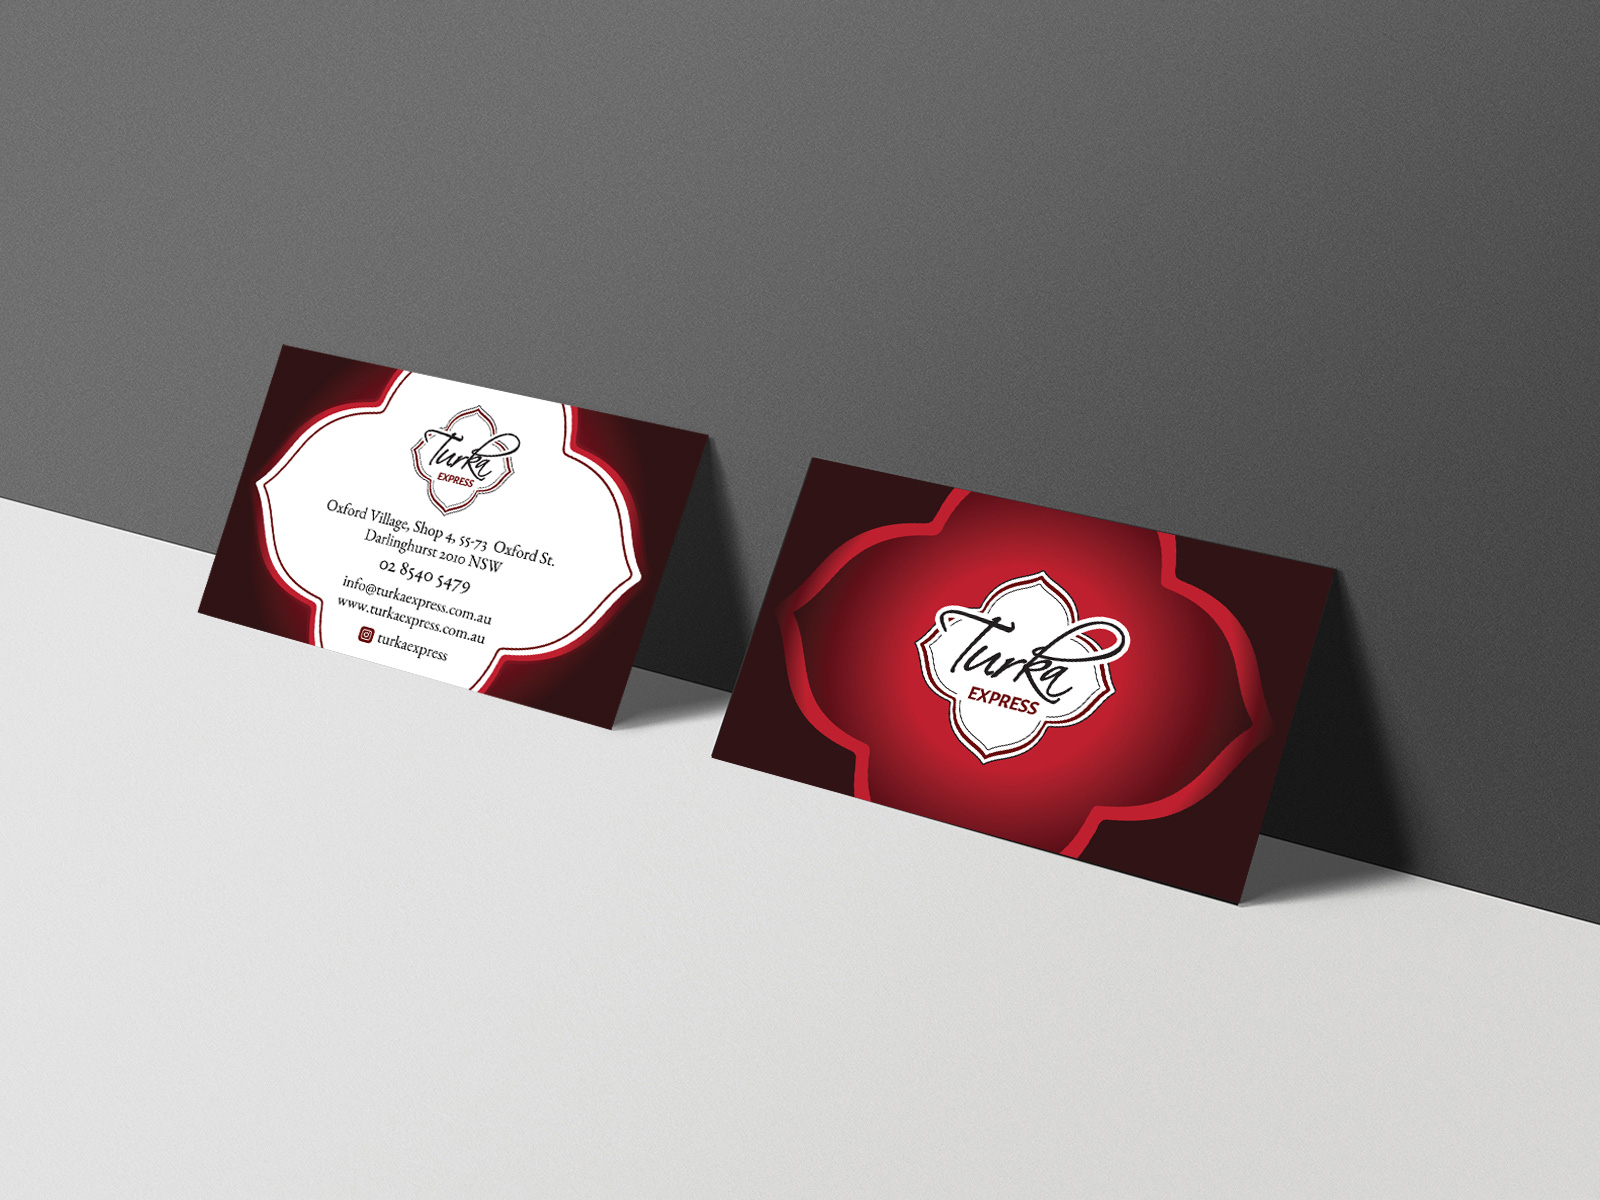 Turka Restaurant & Cafe Menu Corporate Identyty Business Card and Logo